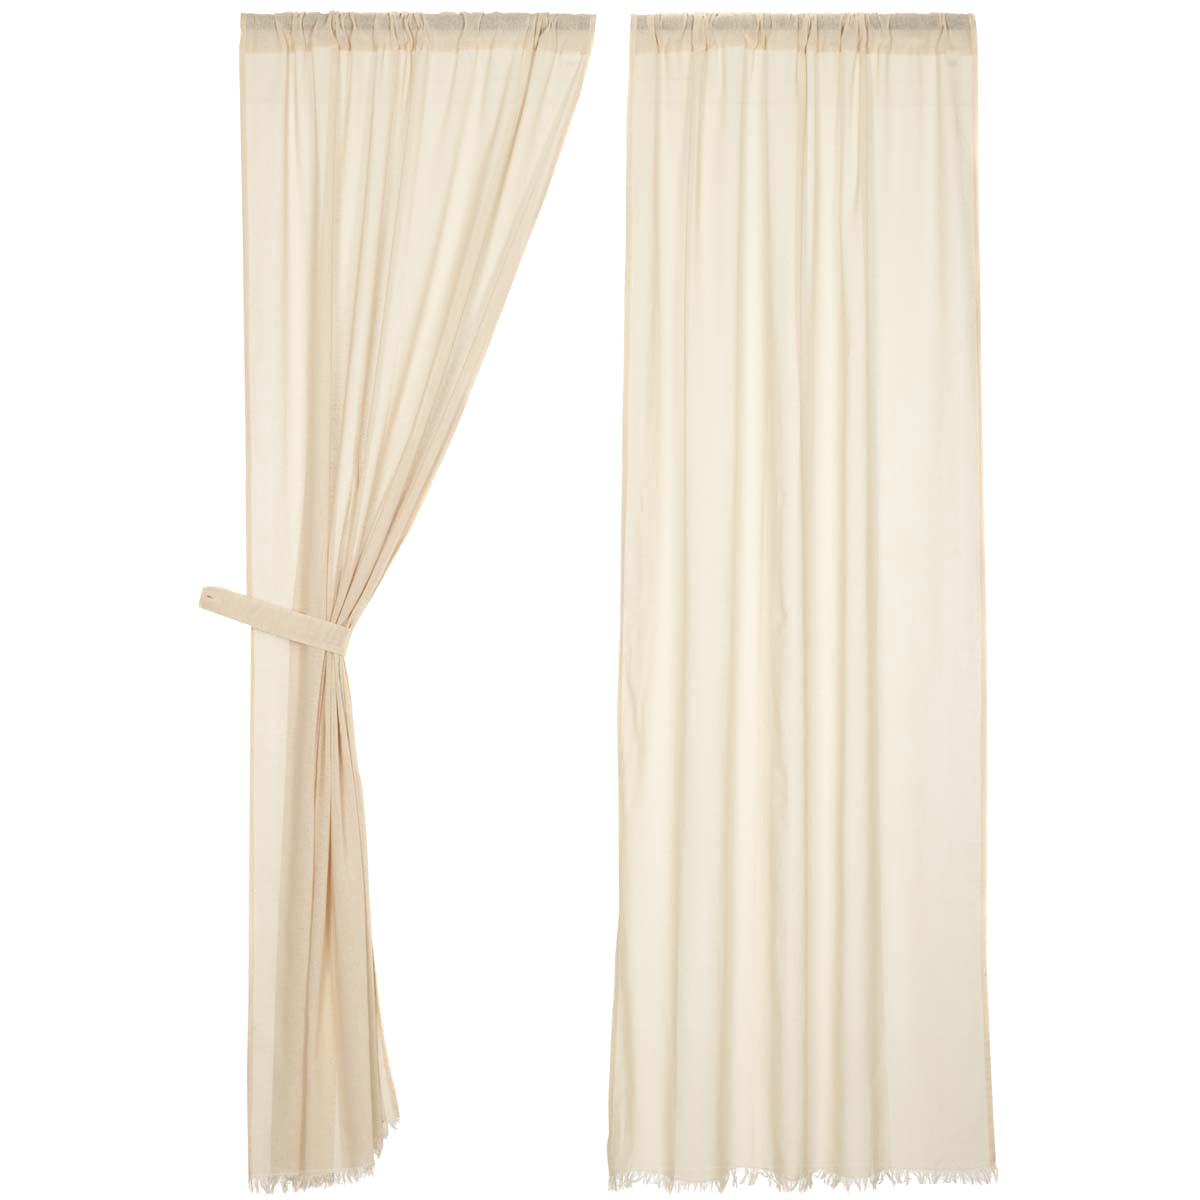 Curtains PNG Background Image